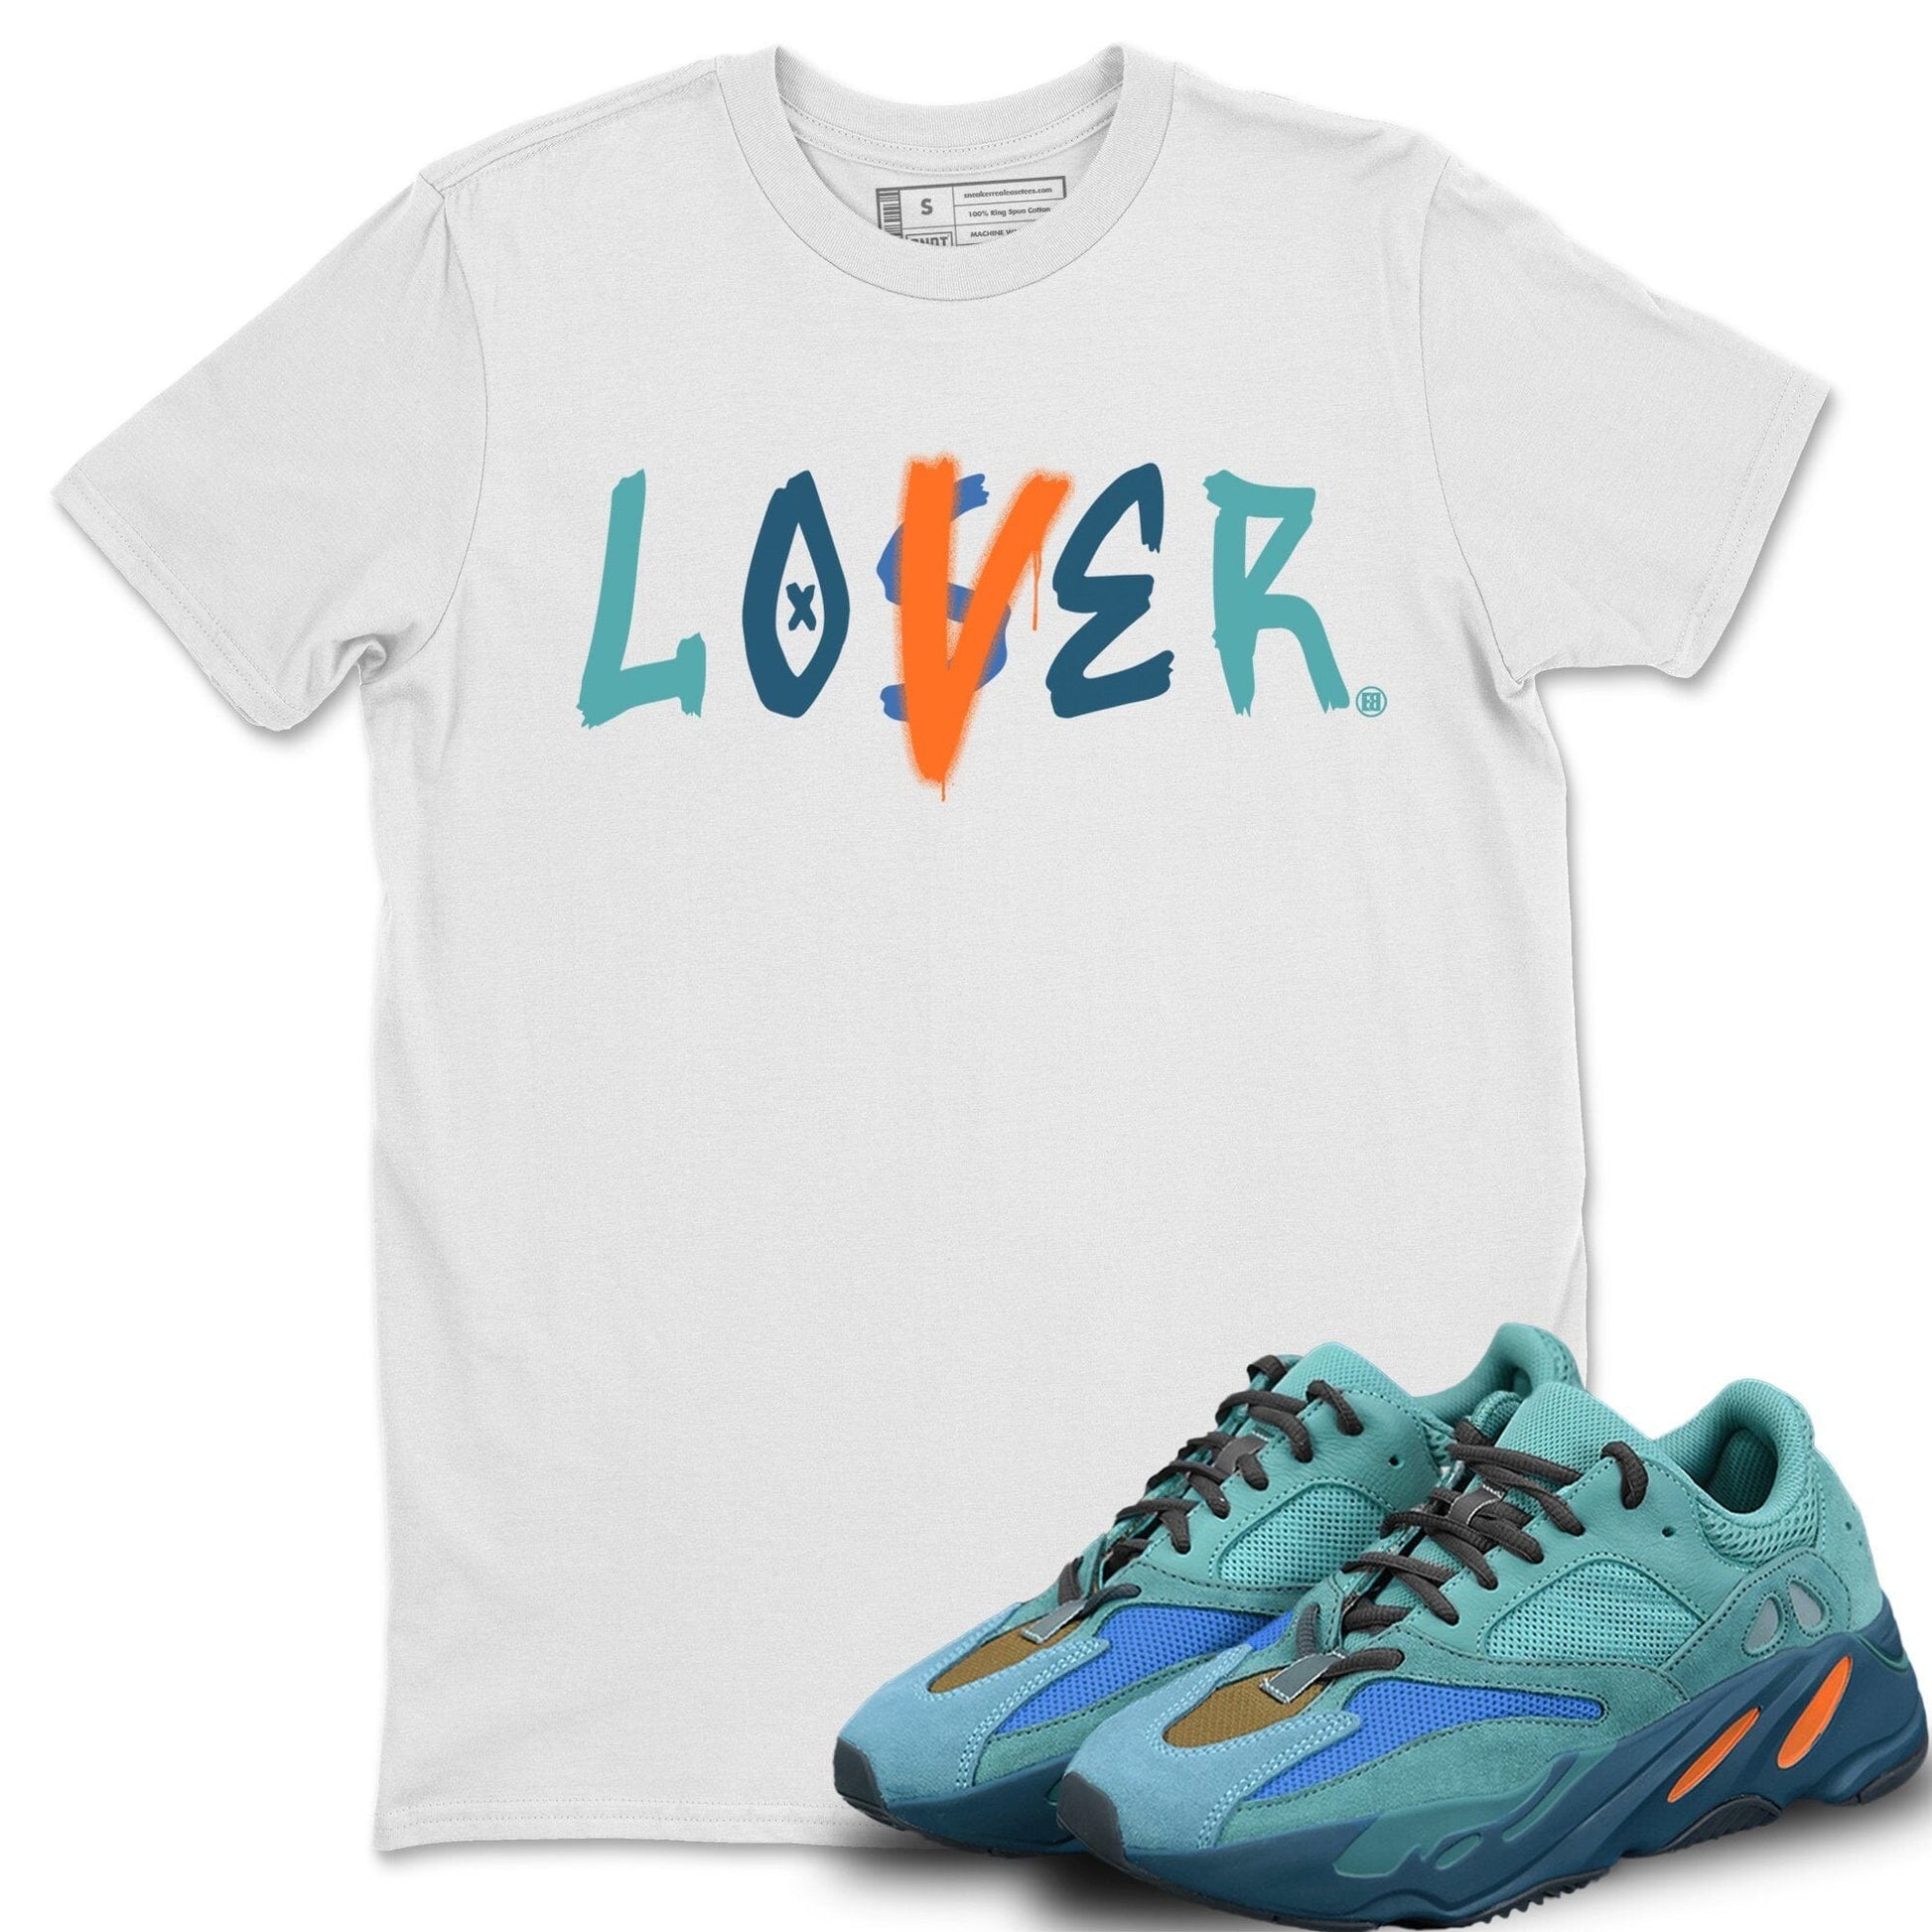 Yeezy 700 Faded Azure Sneaker Match Tees Loser Lover Sneaker Tees Yeezy 700 Faded Azure Sneaker Release Tees Unisex Shirts